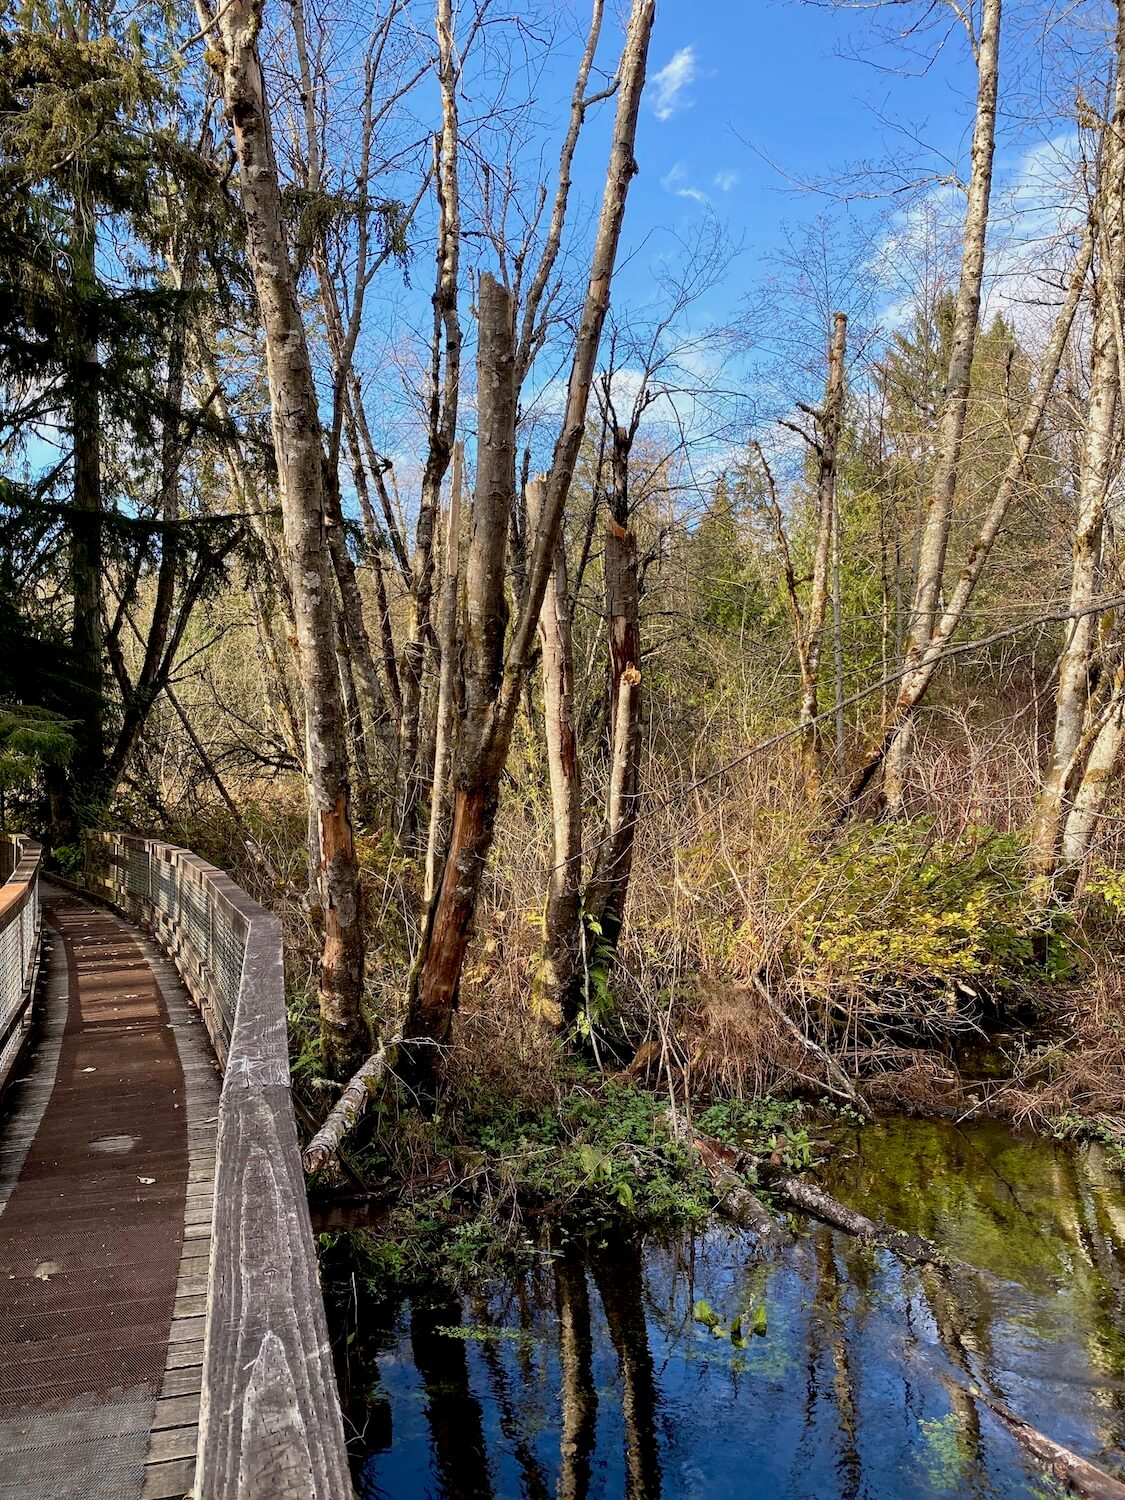 A winter walk on the plank system of West Hylebos park is a great outdoor thing to do in the Seattle area.  Here, a spring supplies water to low level brush and leafless winter trees.  The Plank system passes by with weathered railings and wood planks.  